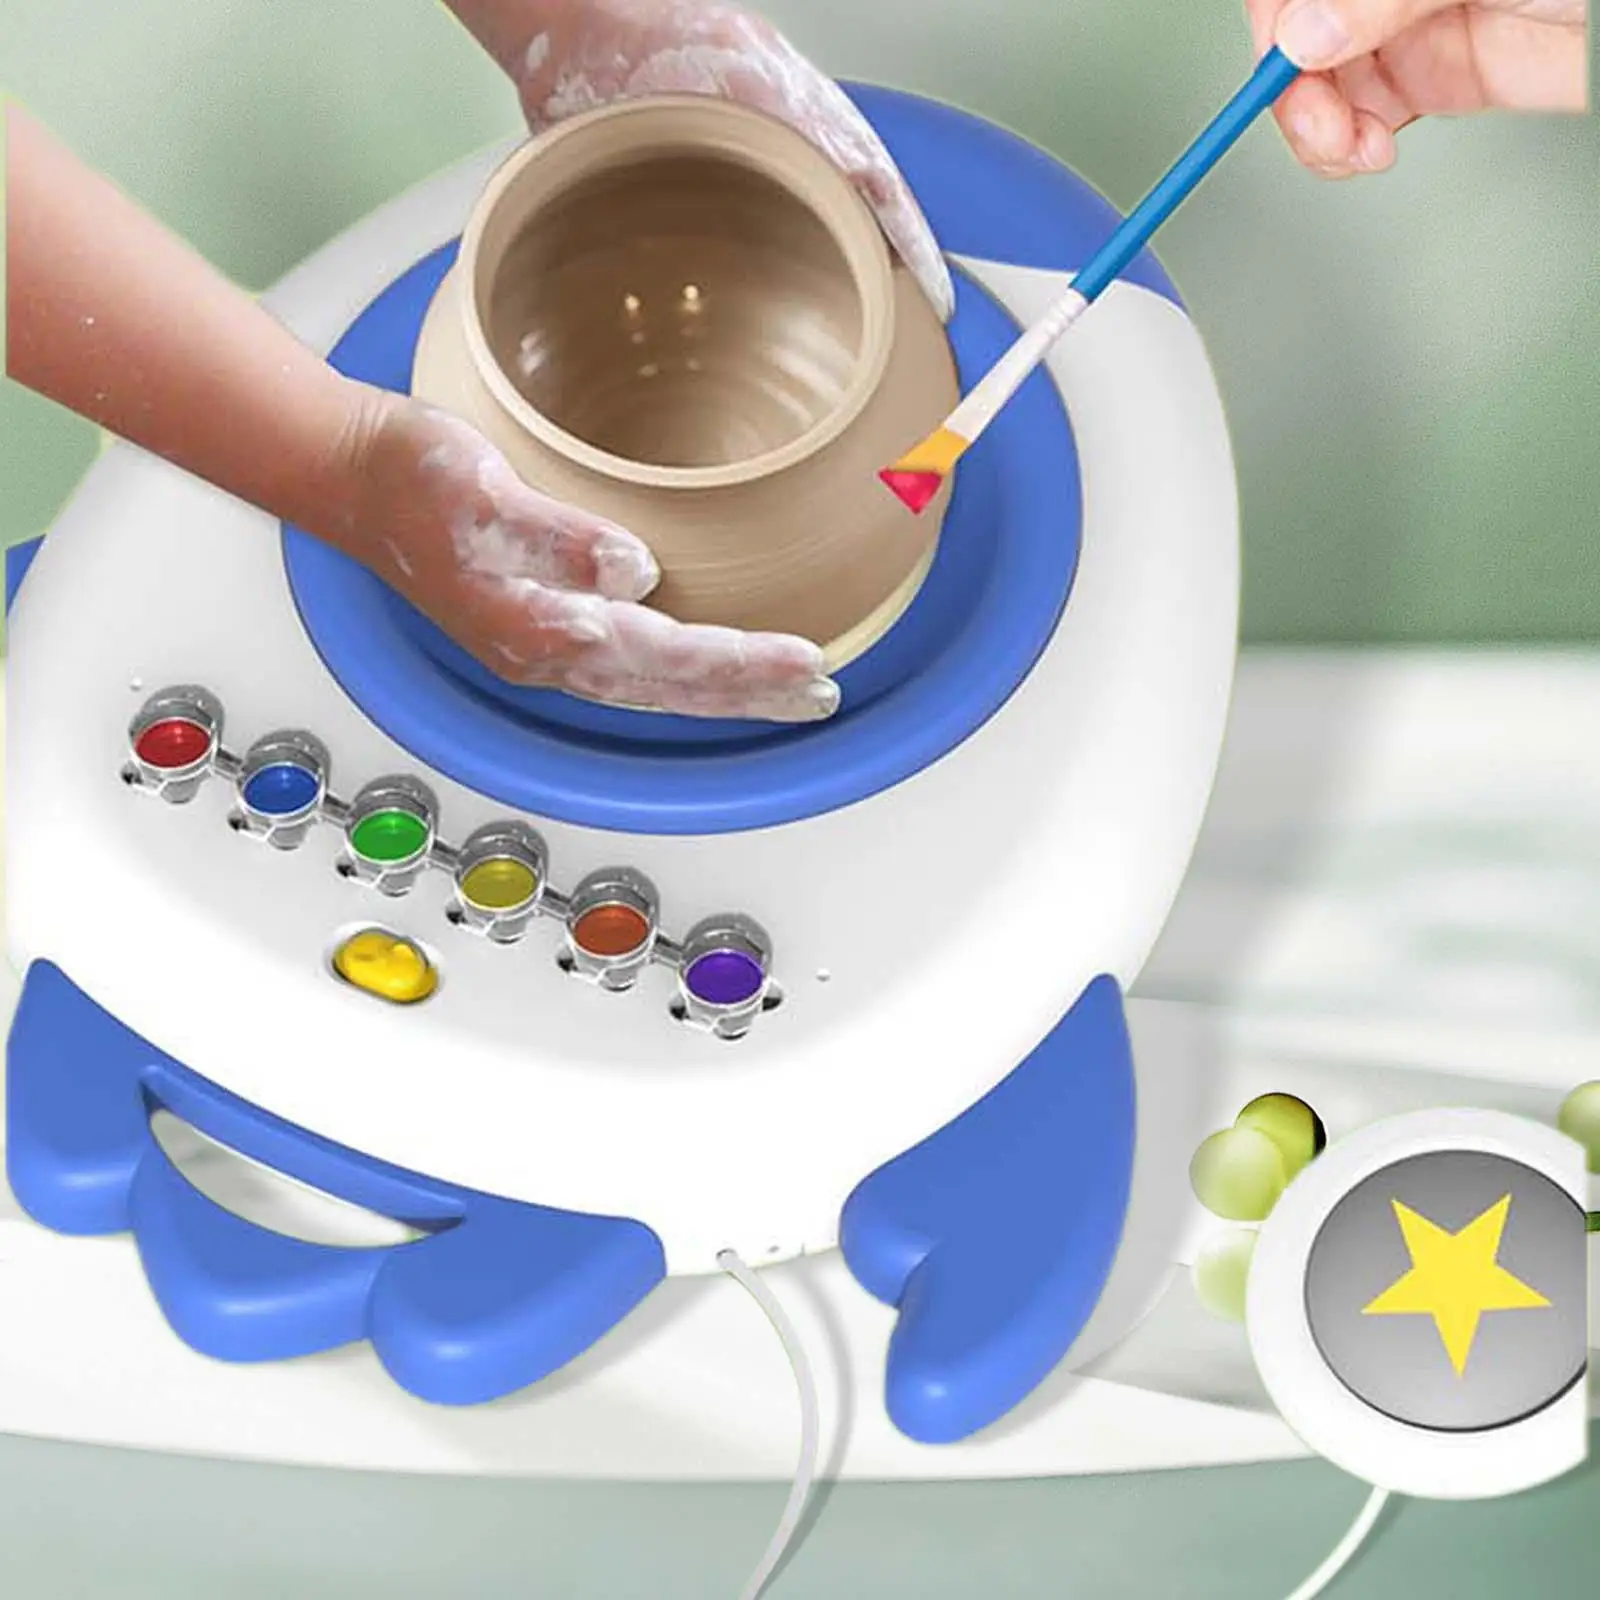 Handmade Pottery Machine Educational Cognition for Holiday Activities Family